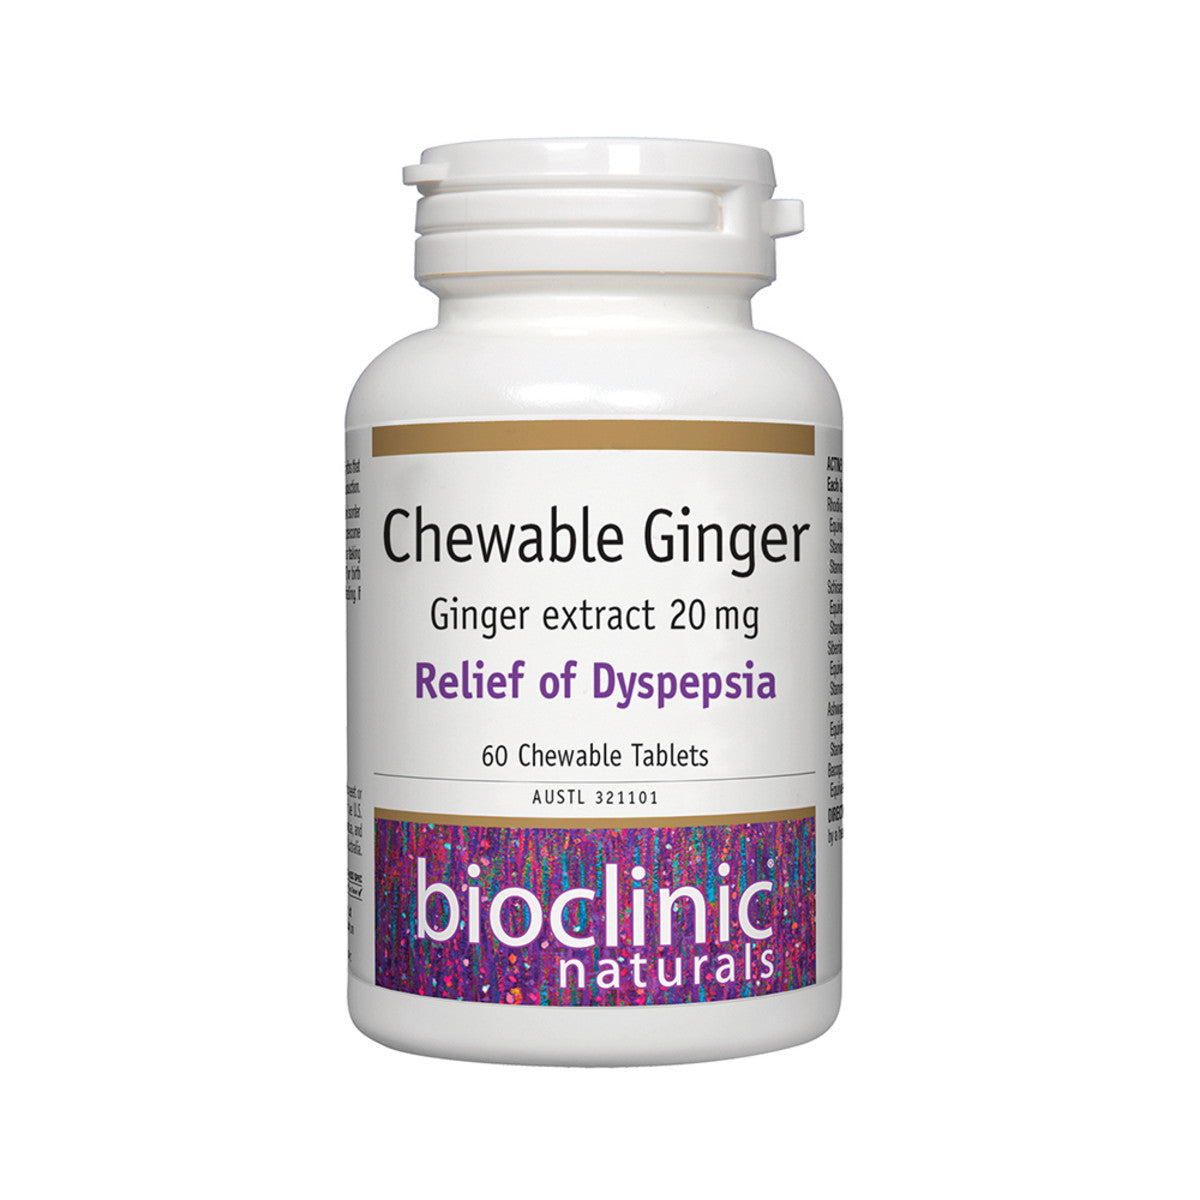 Bioclinic Naturals - Chewable Ginger